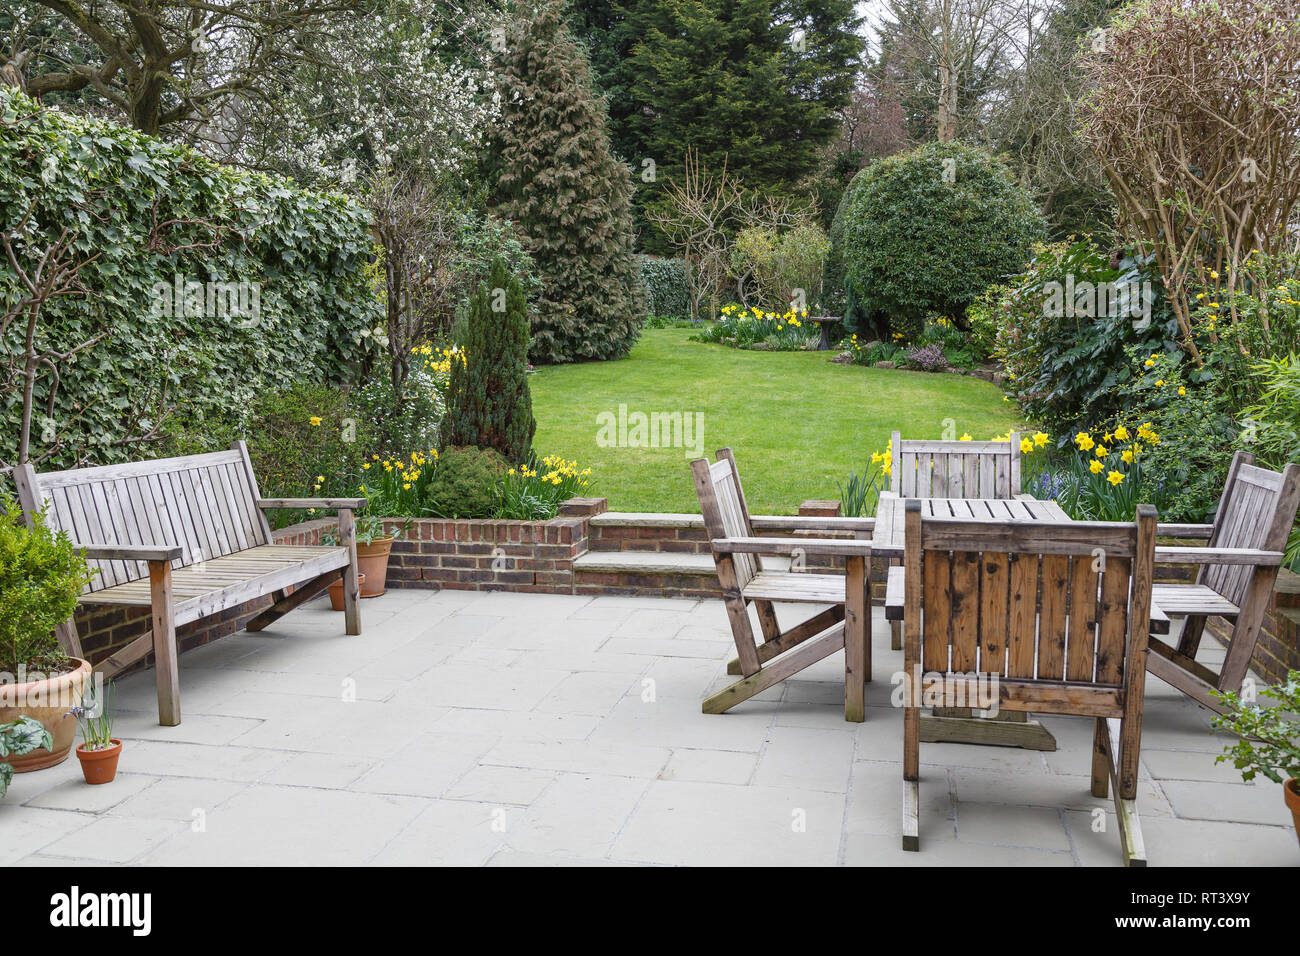 Wooden bench, table and chairs on a patio in a London suburban garden Stock Photo